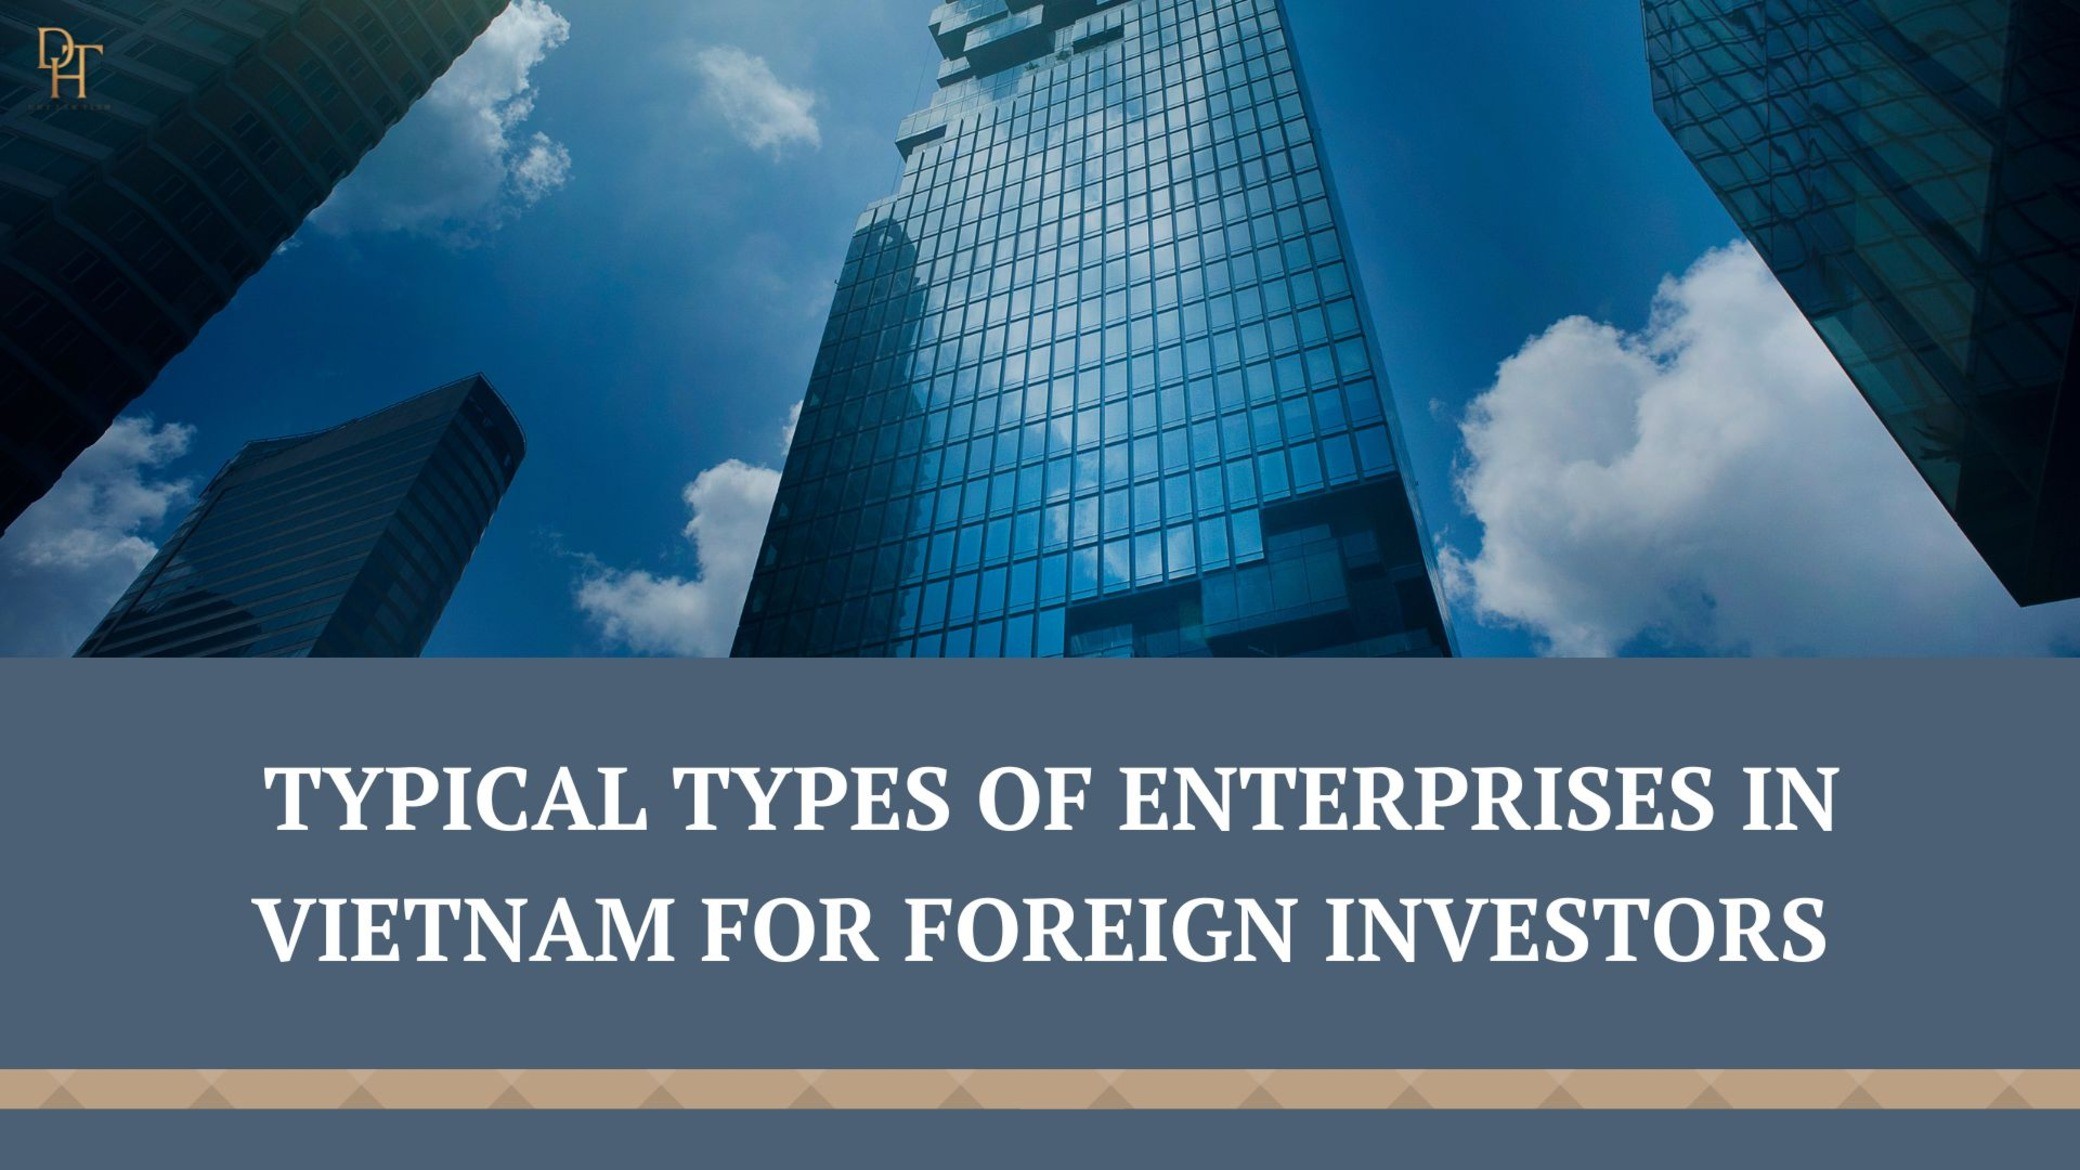 TYPICAL TYPES OF ENTERPRISES IN VIETNAM  FOR FOREIGN INVESTORS